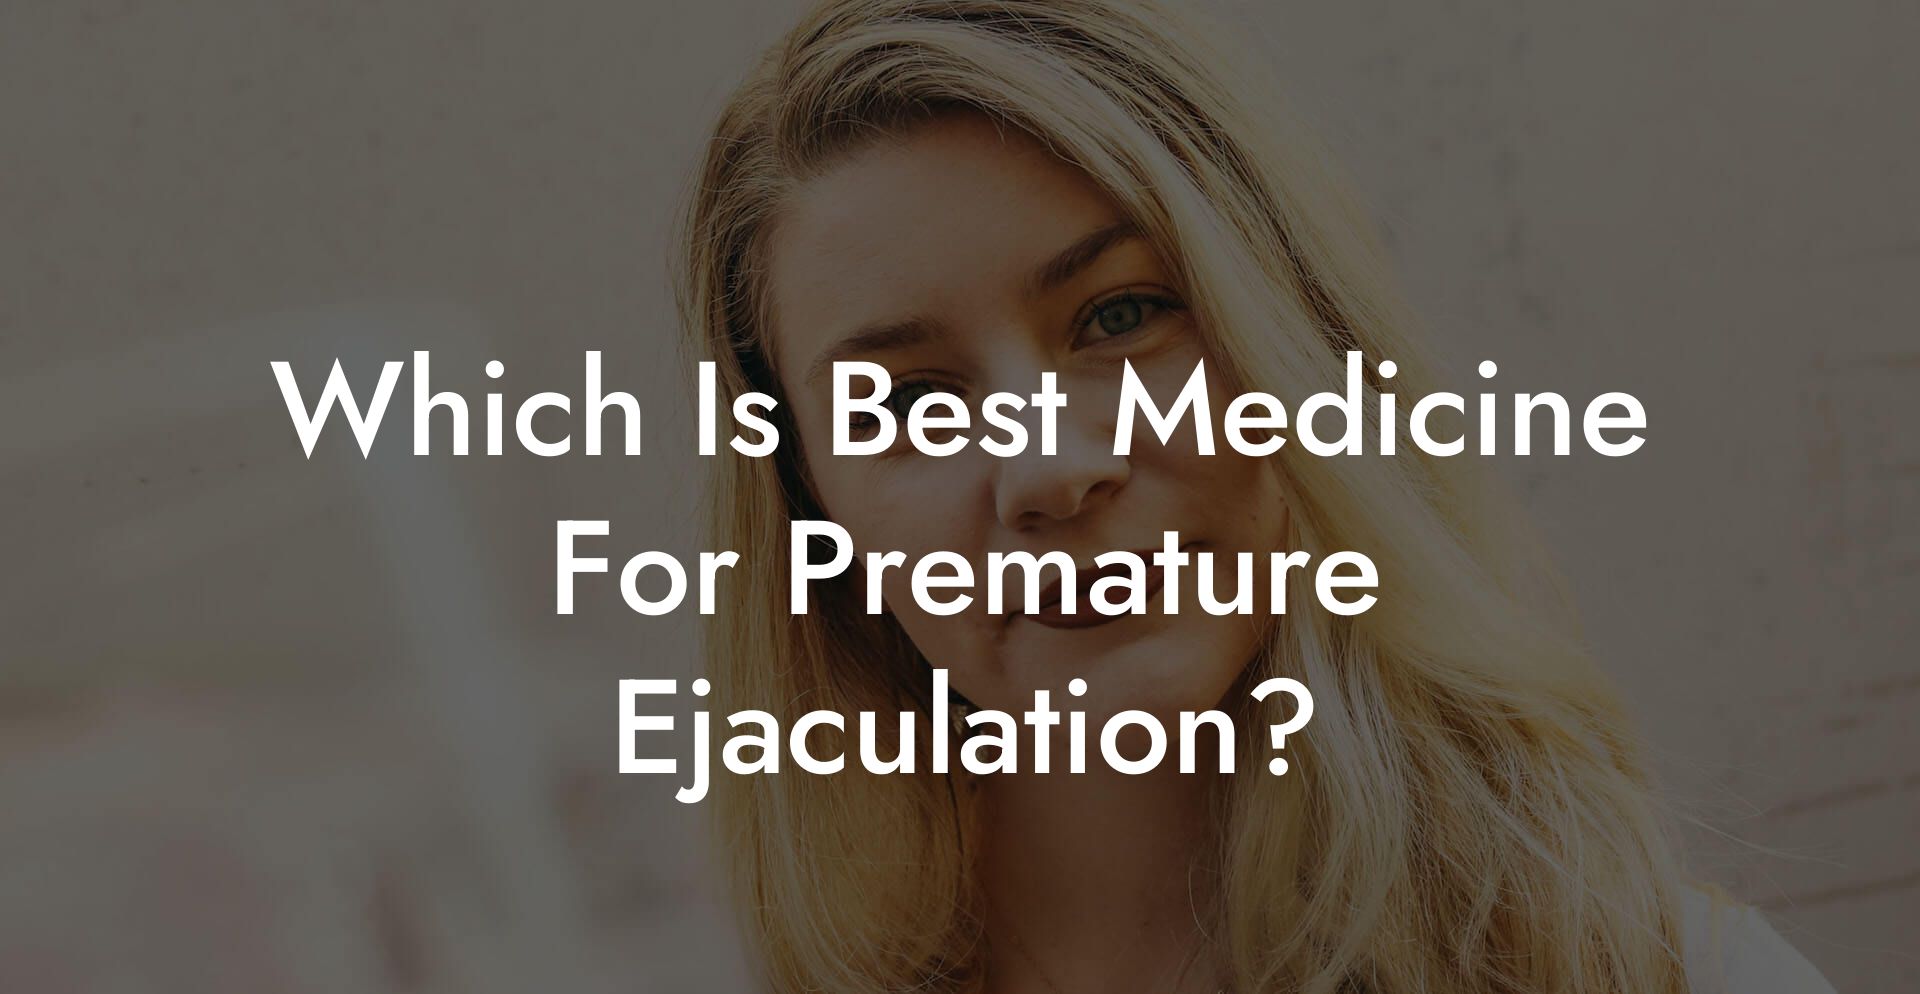 Which Is Best Medicine For Premature Ejaculation?